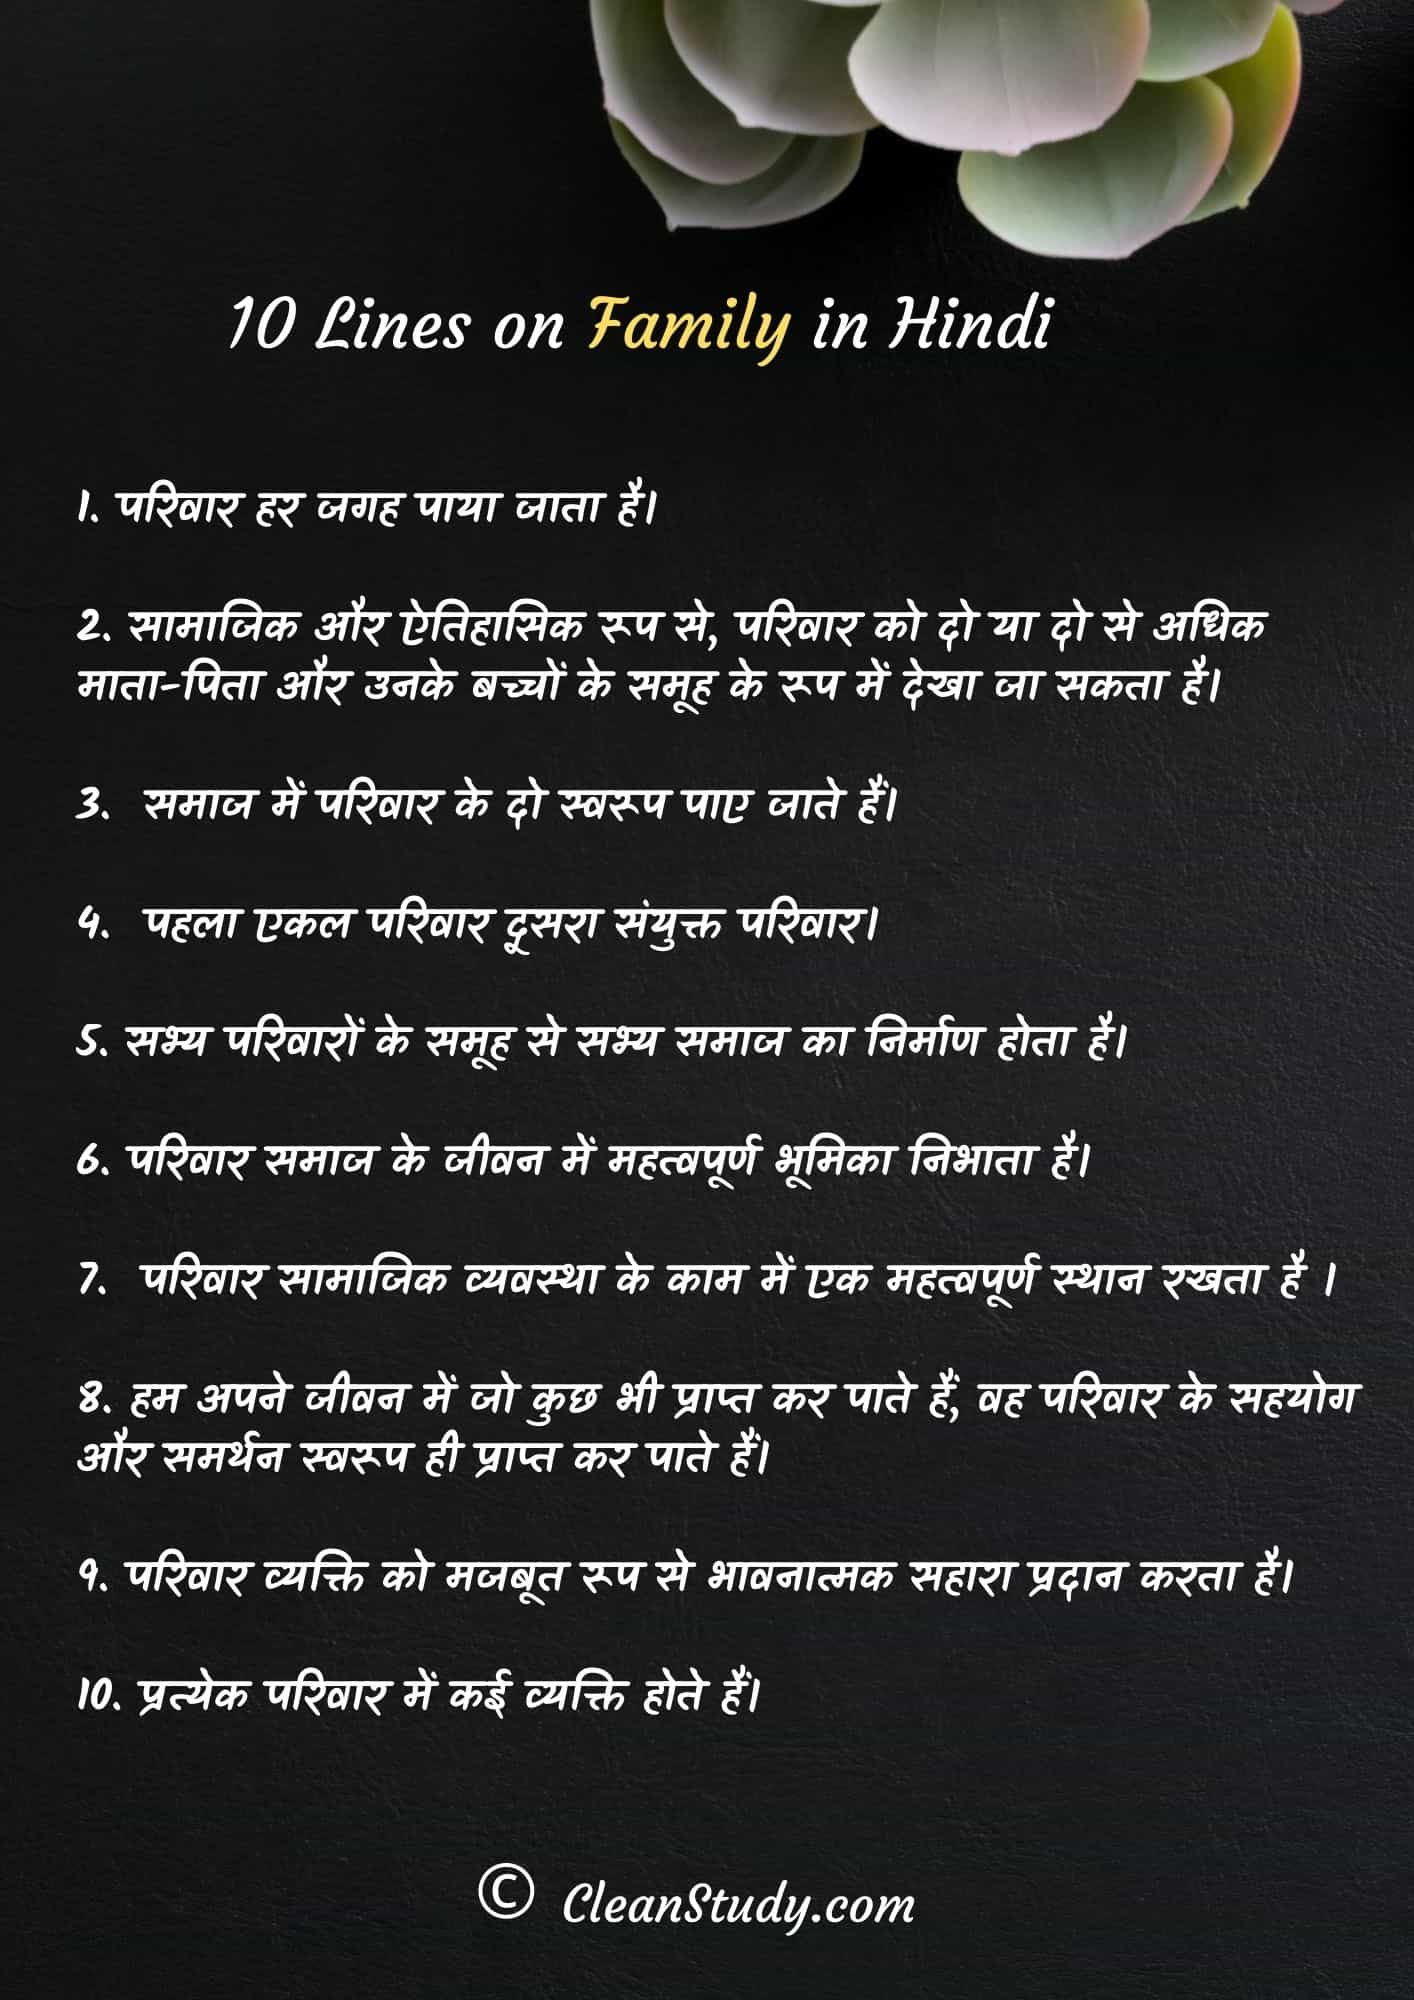 10 Lines on Family in Hindi 